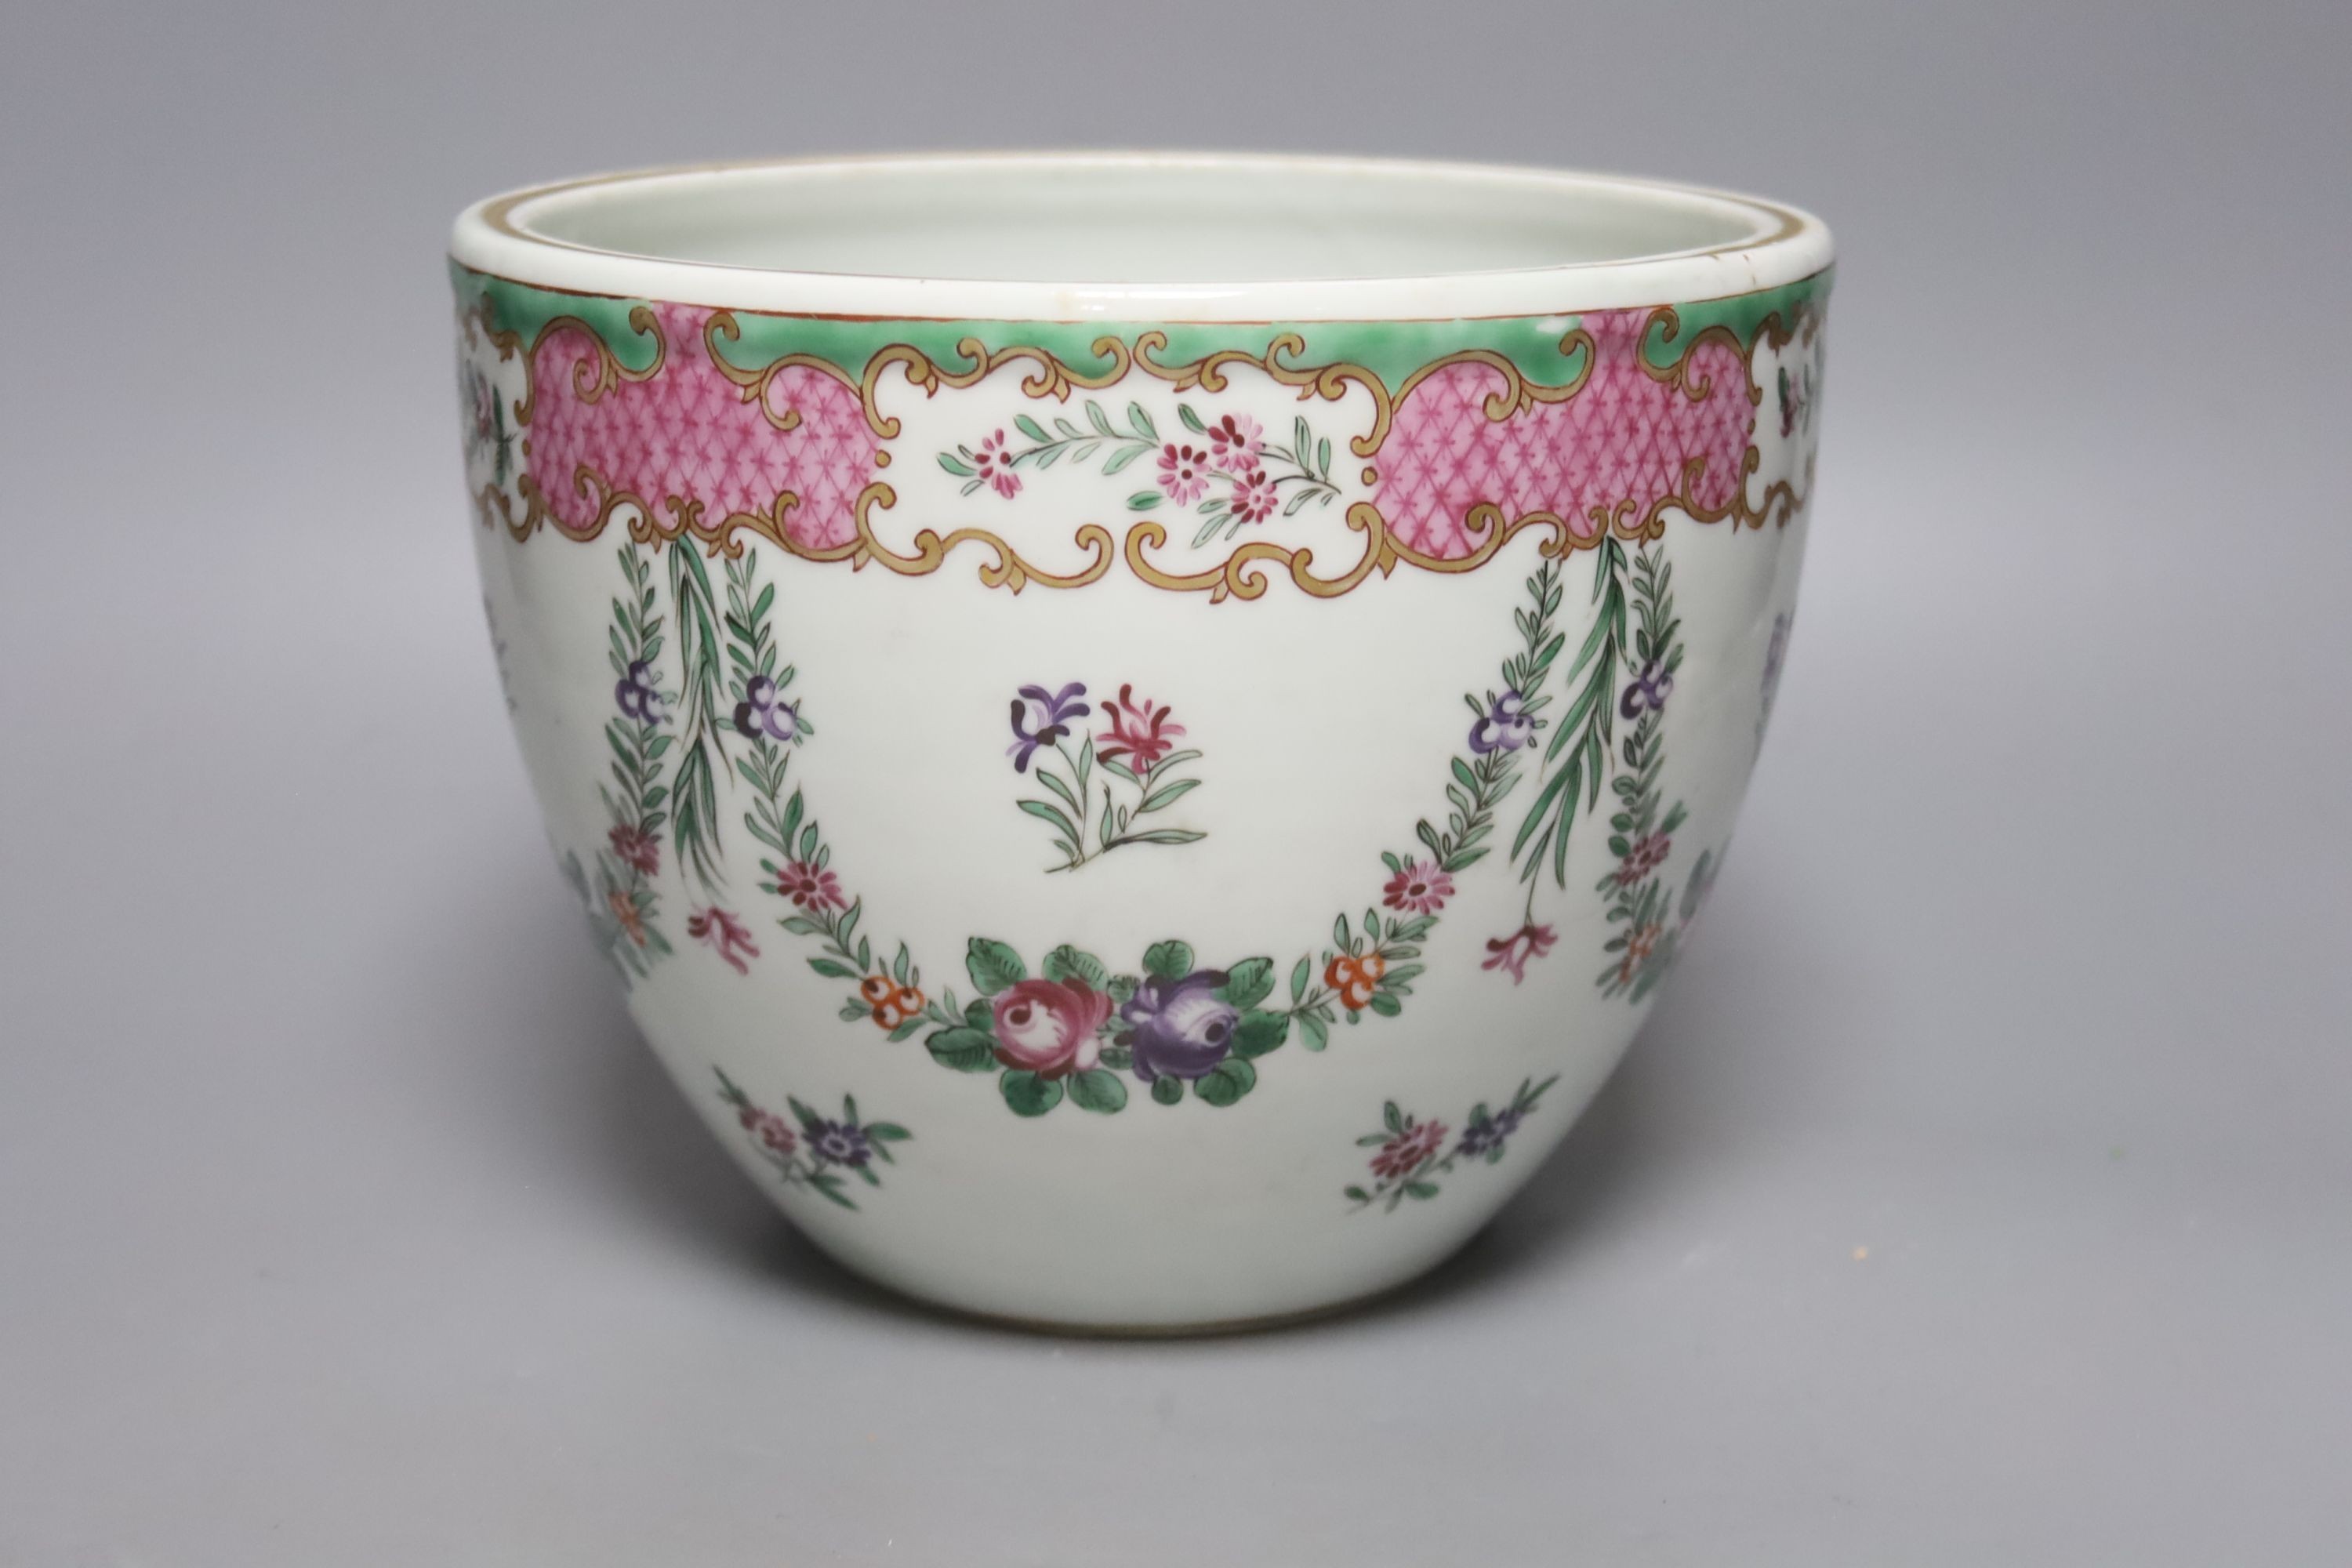 A 19th century Samson famille rose jardiniere in Chinese style, height 17cm